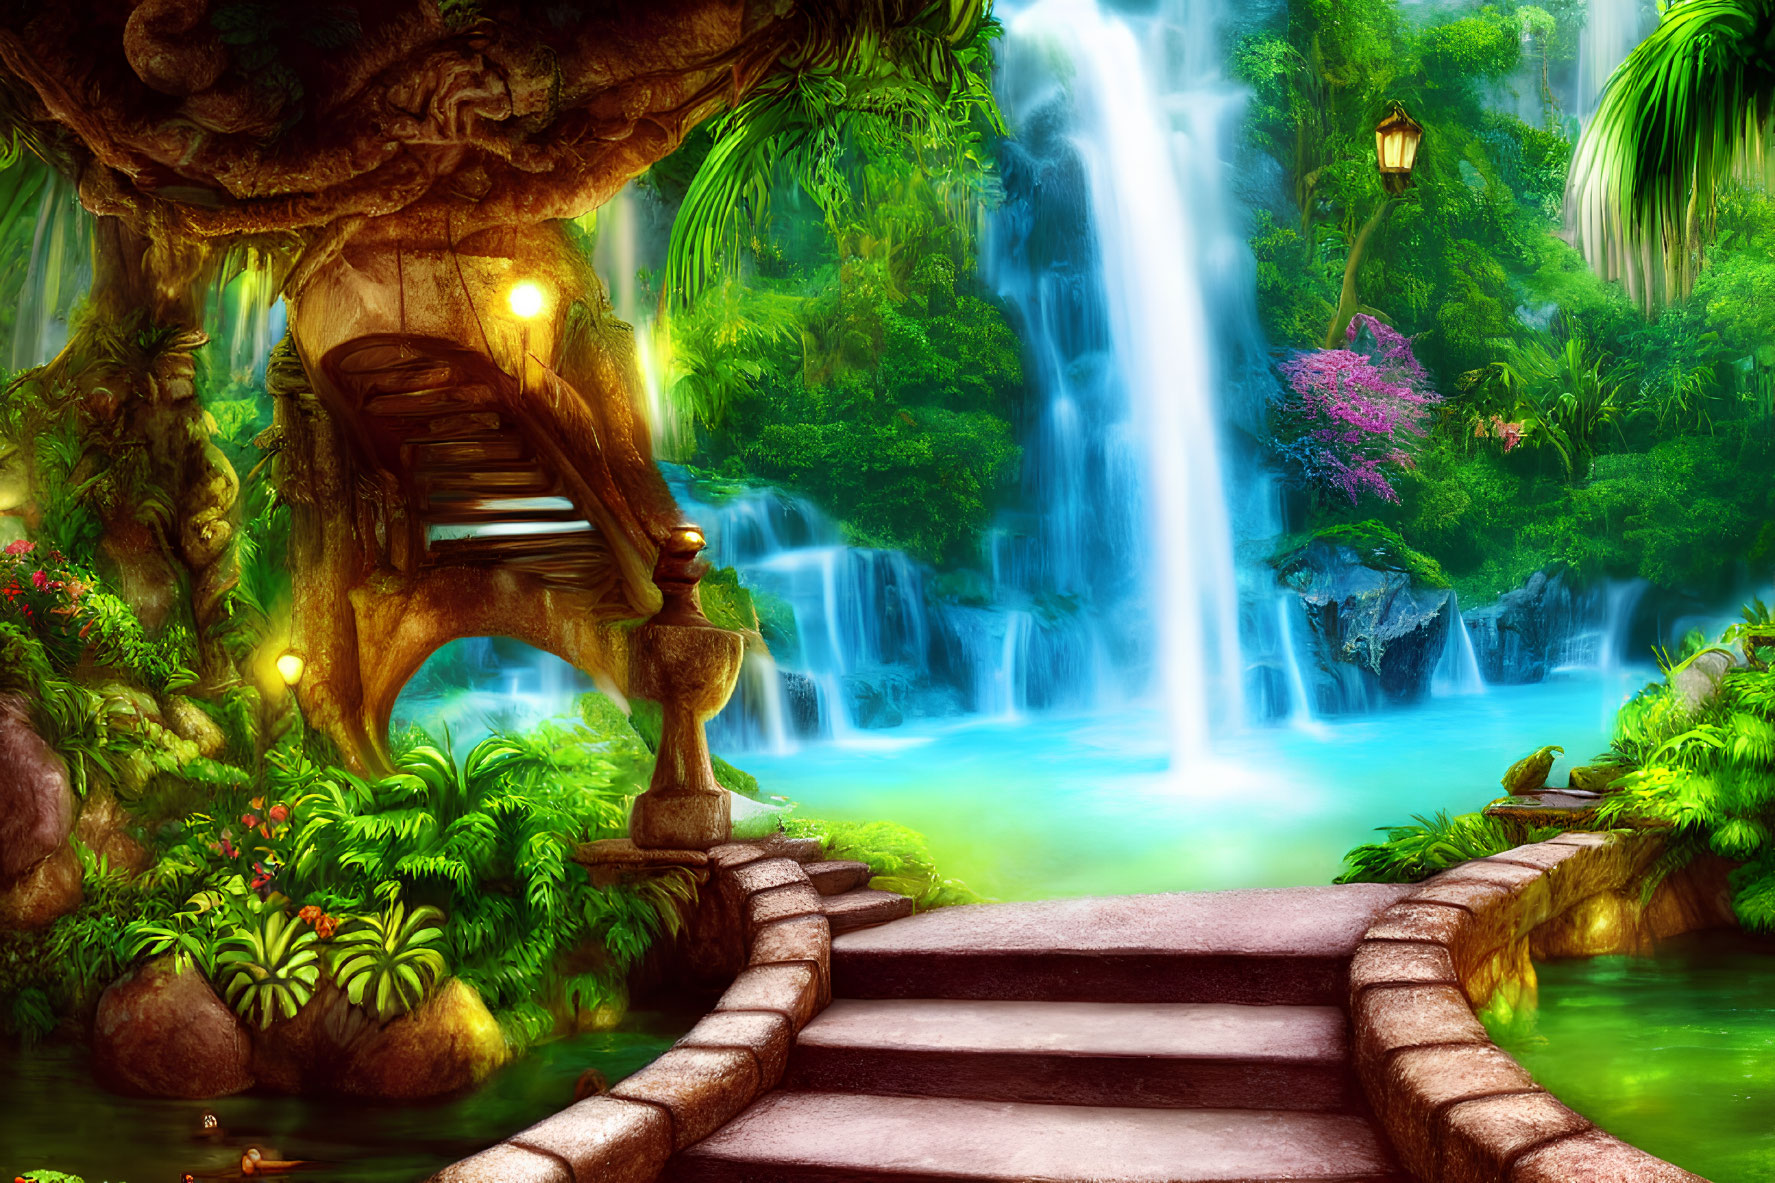 Fantasy landscape with waterfall, greenery, lanterns, stone pathway & whimsical tree